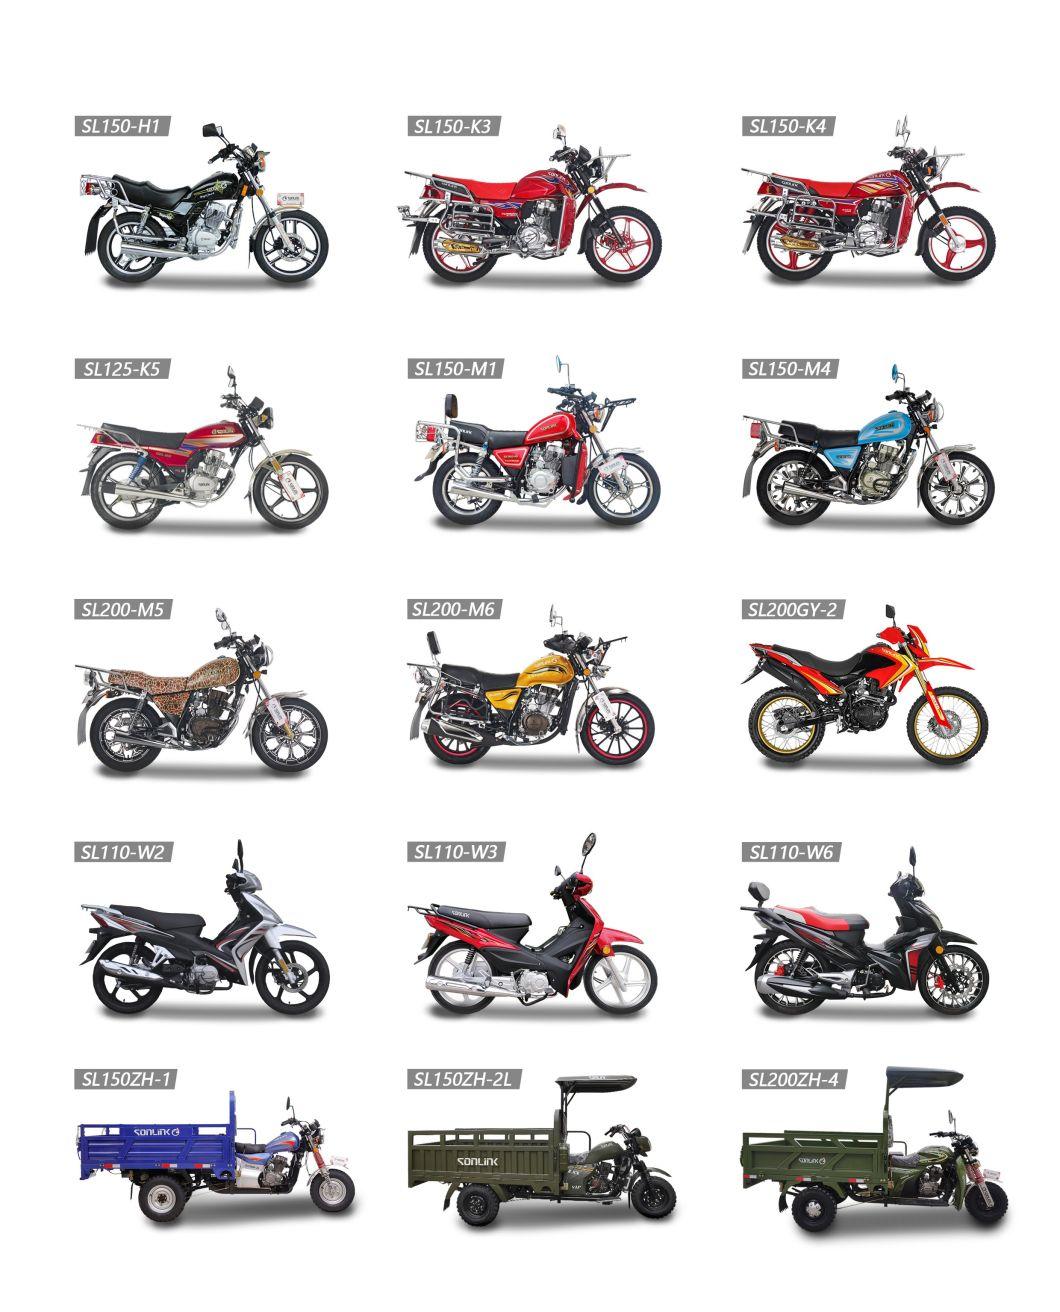 The Best -Selling High-Quaity Motorbike /Motorcycle Chassis